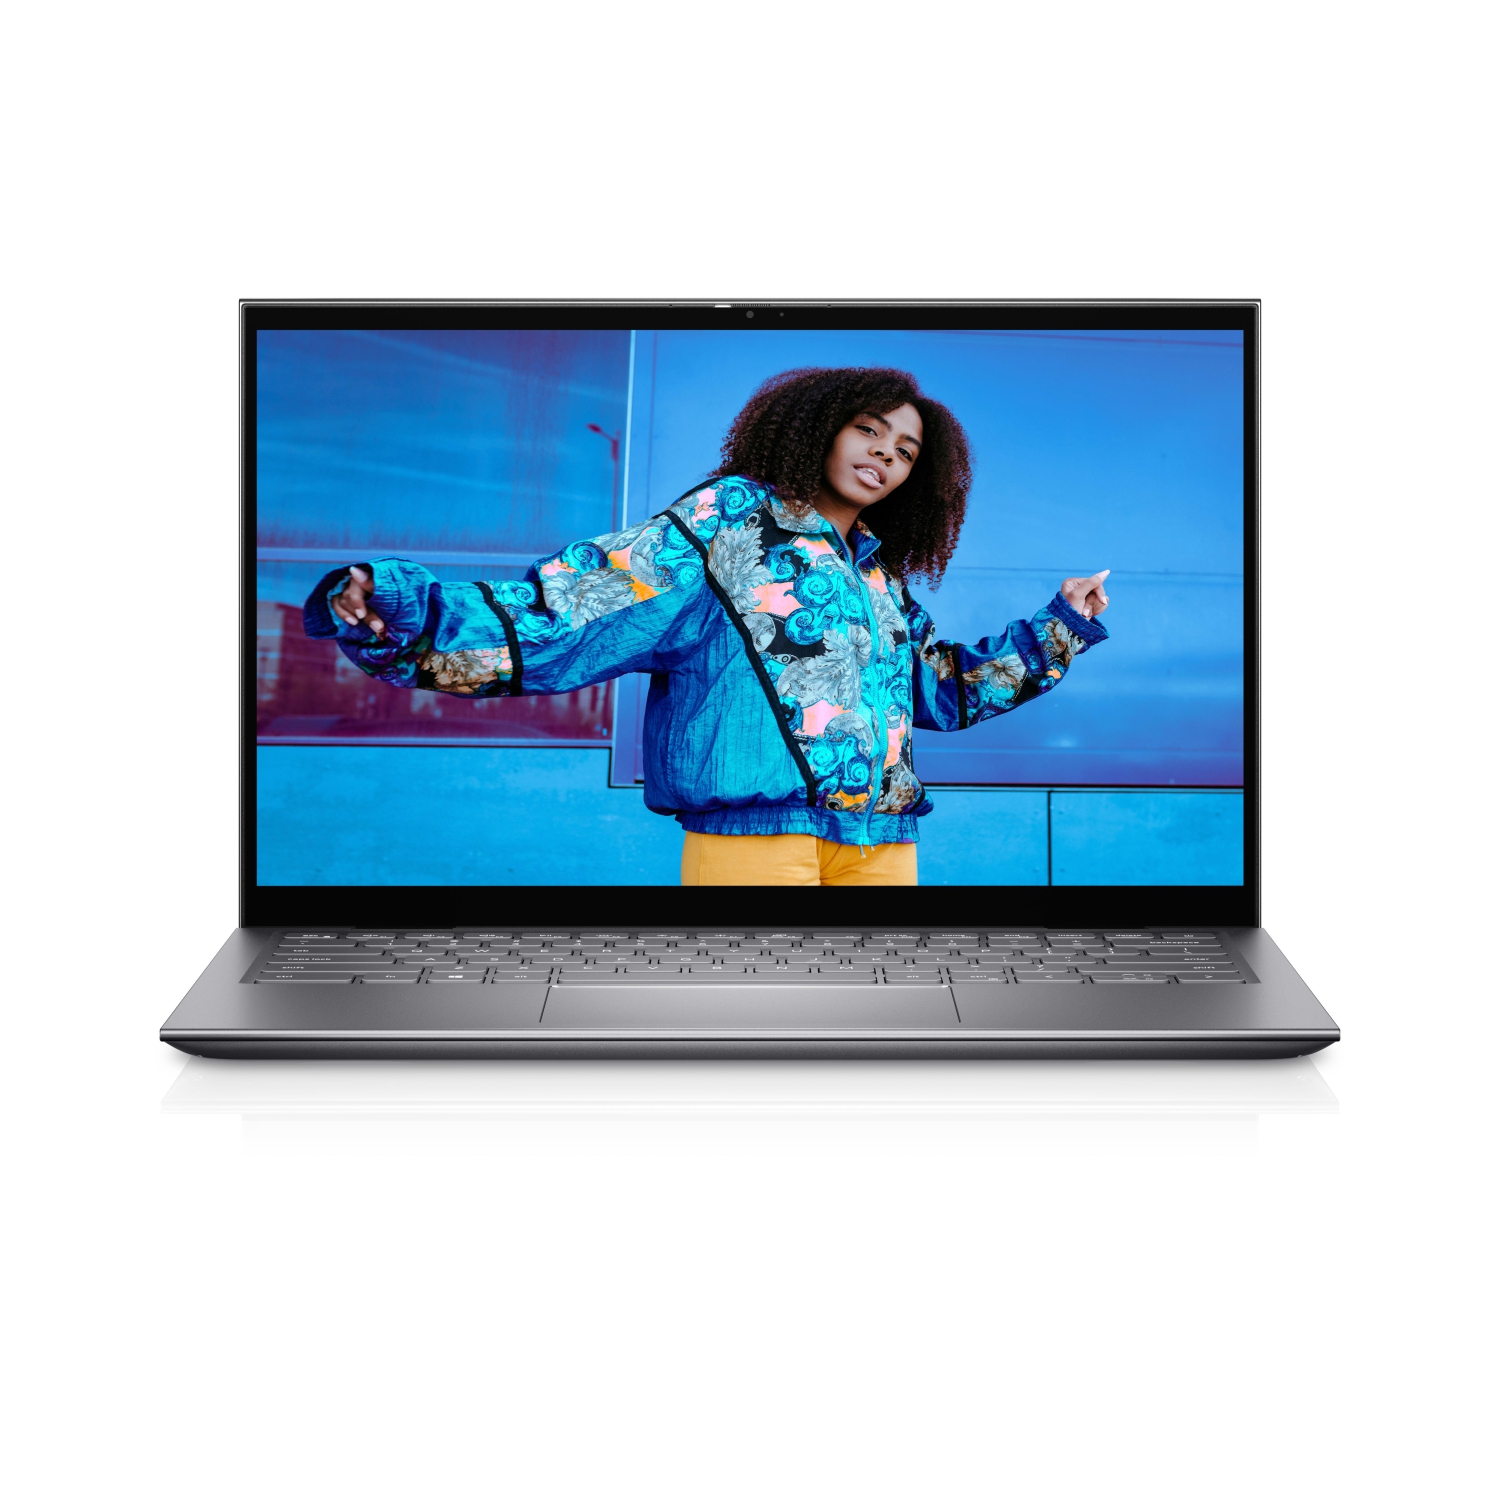 Refurbished (Excellent) – Dell Inspiron 5410 2-in-1 (2021) | 14" FHD Touch | Core i7 - 2TB SSD - 32GB RAM | 4 Cores @ 4.7 GHz - 11th Gen CPU